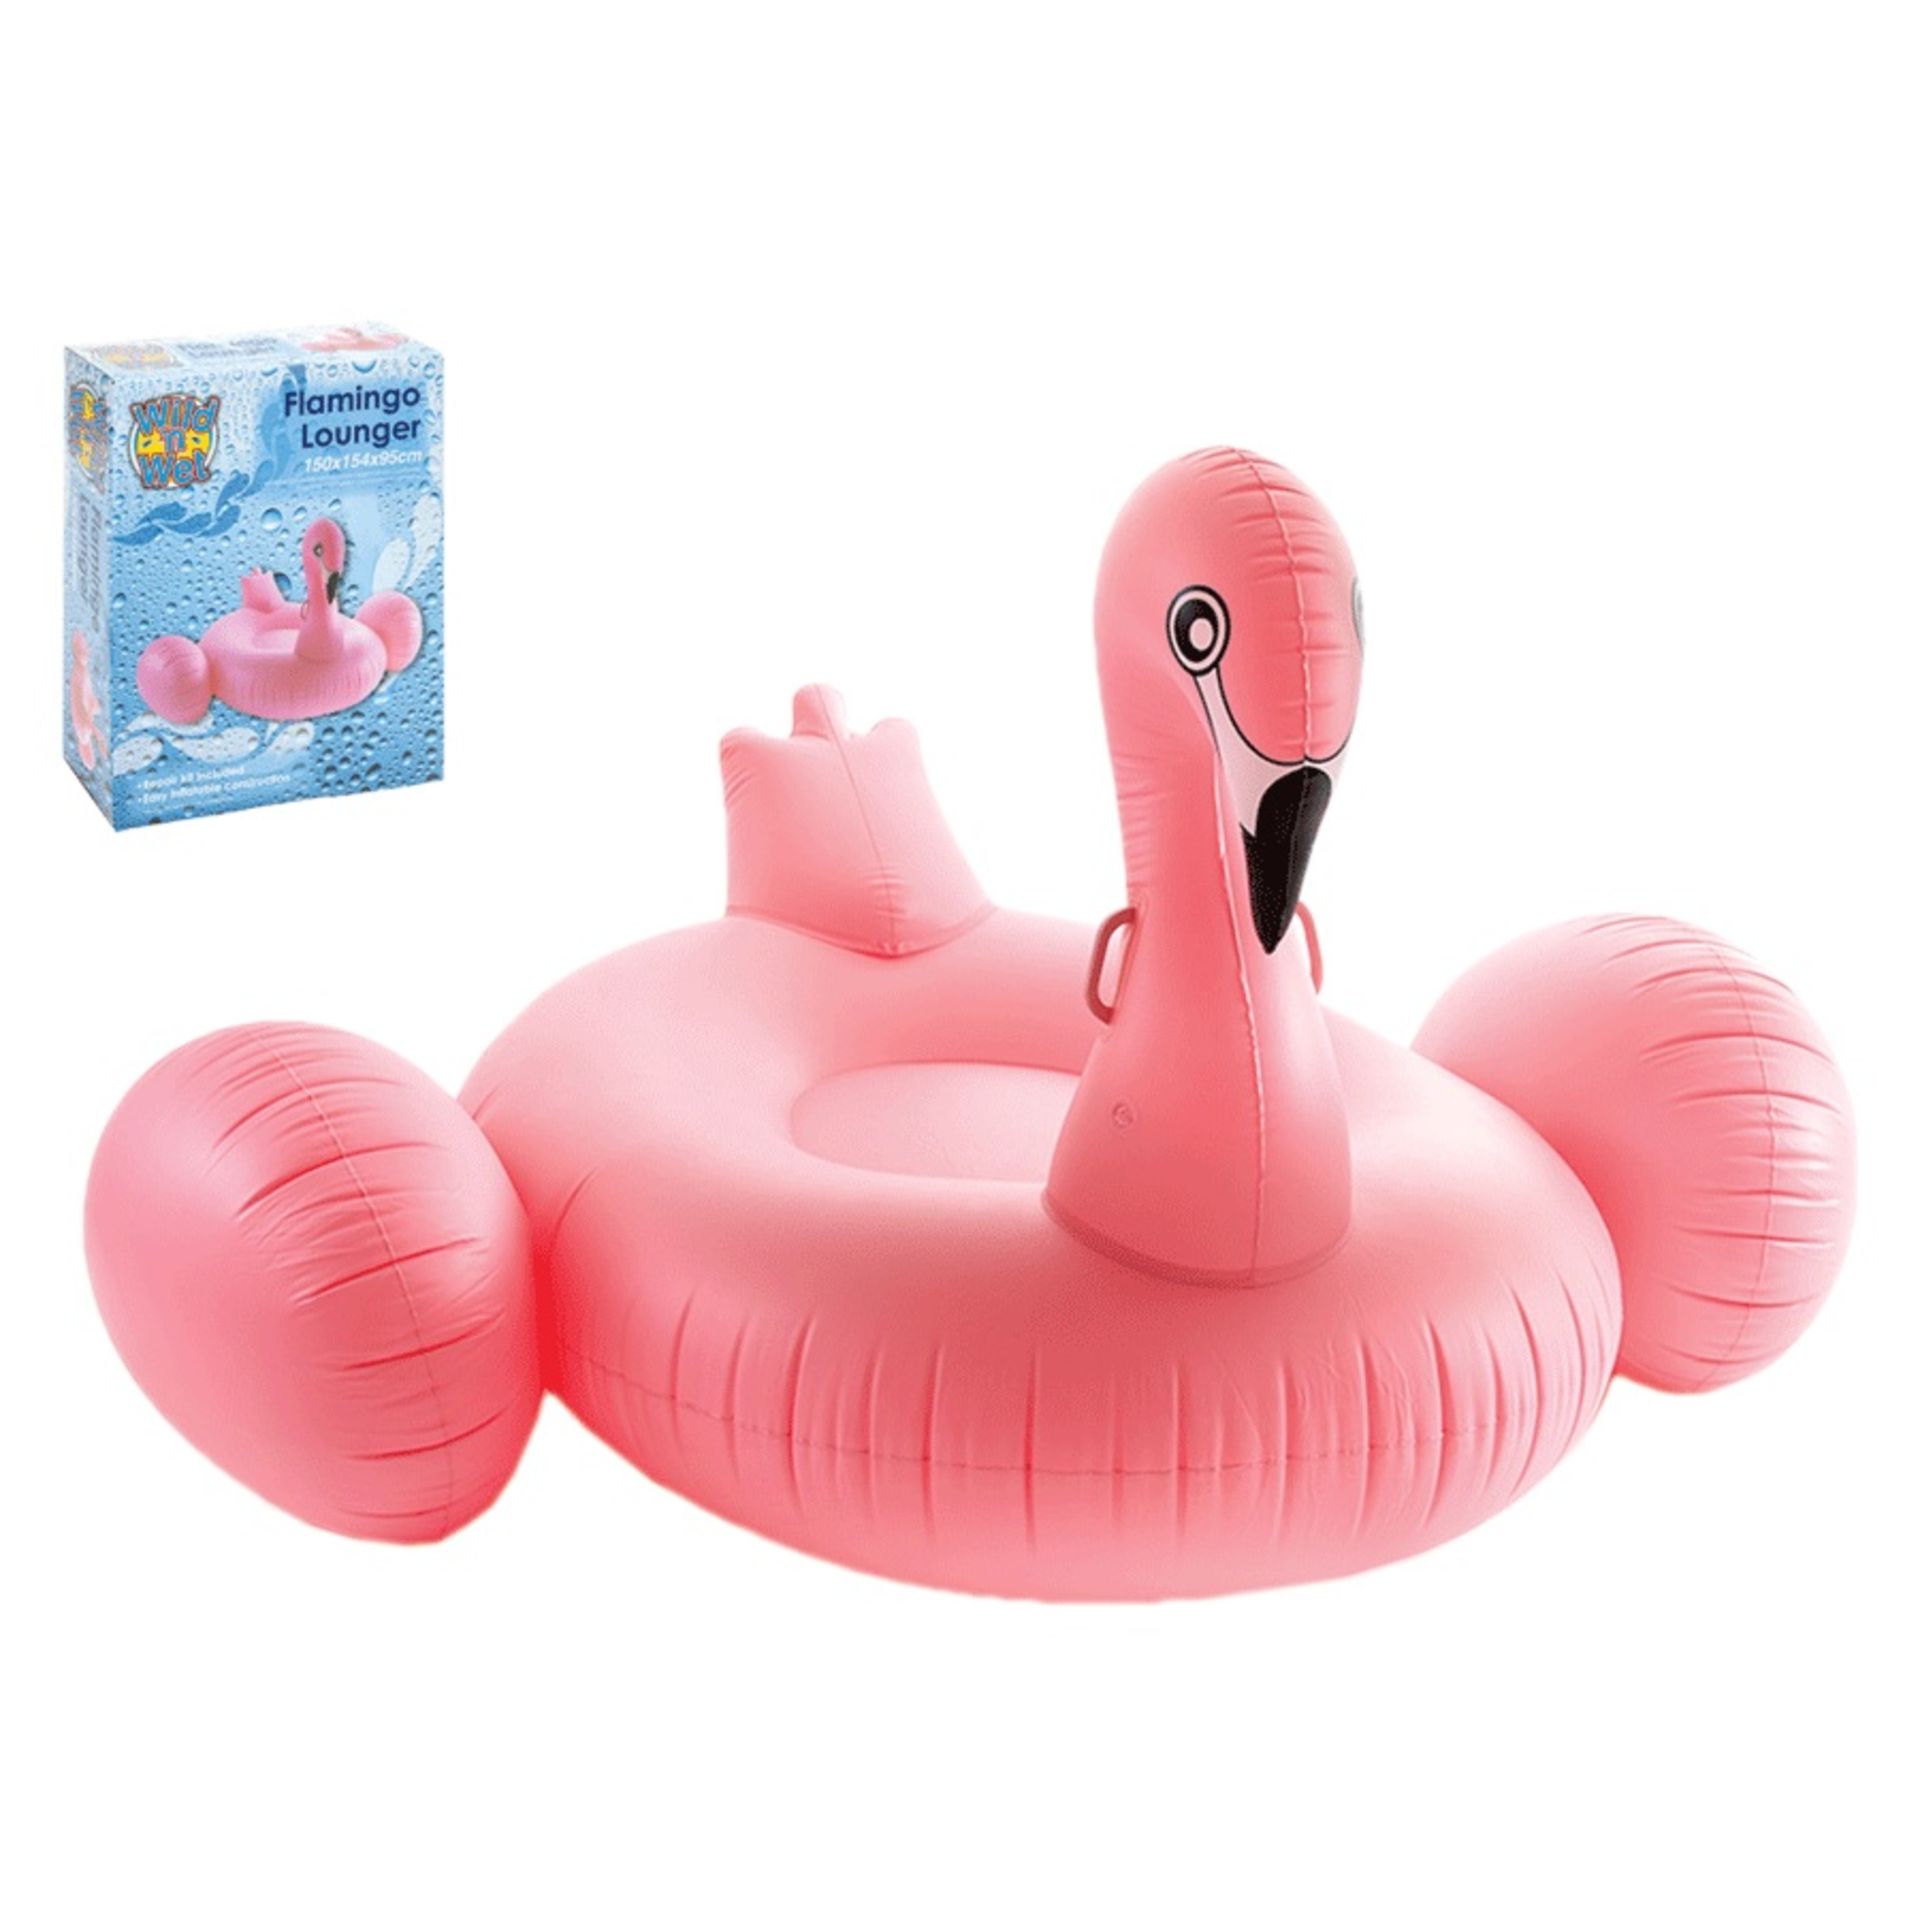 V Brand New Inflatable Flamingo Lounger (150 x 154 x 95cm) - Repair Kit Included - Easy Inflatable